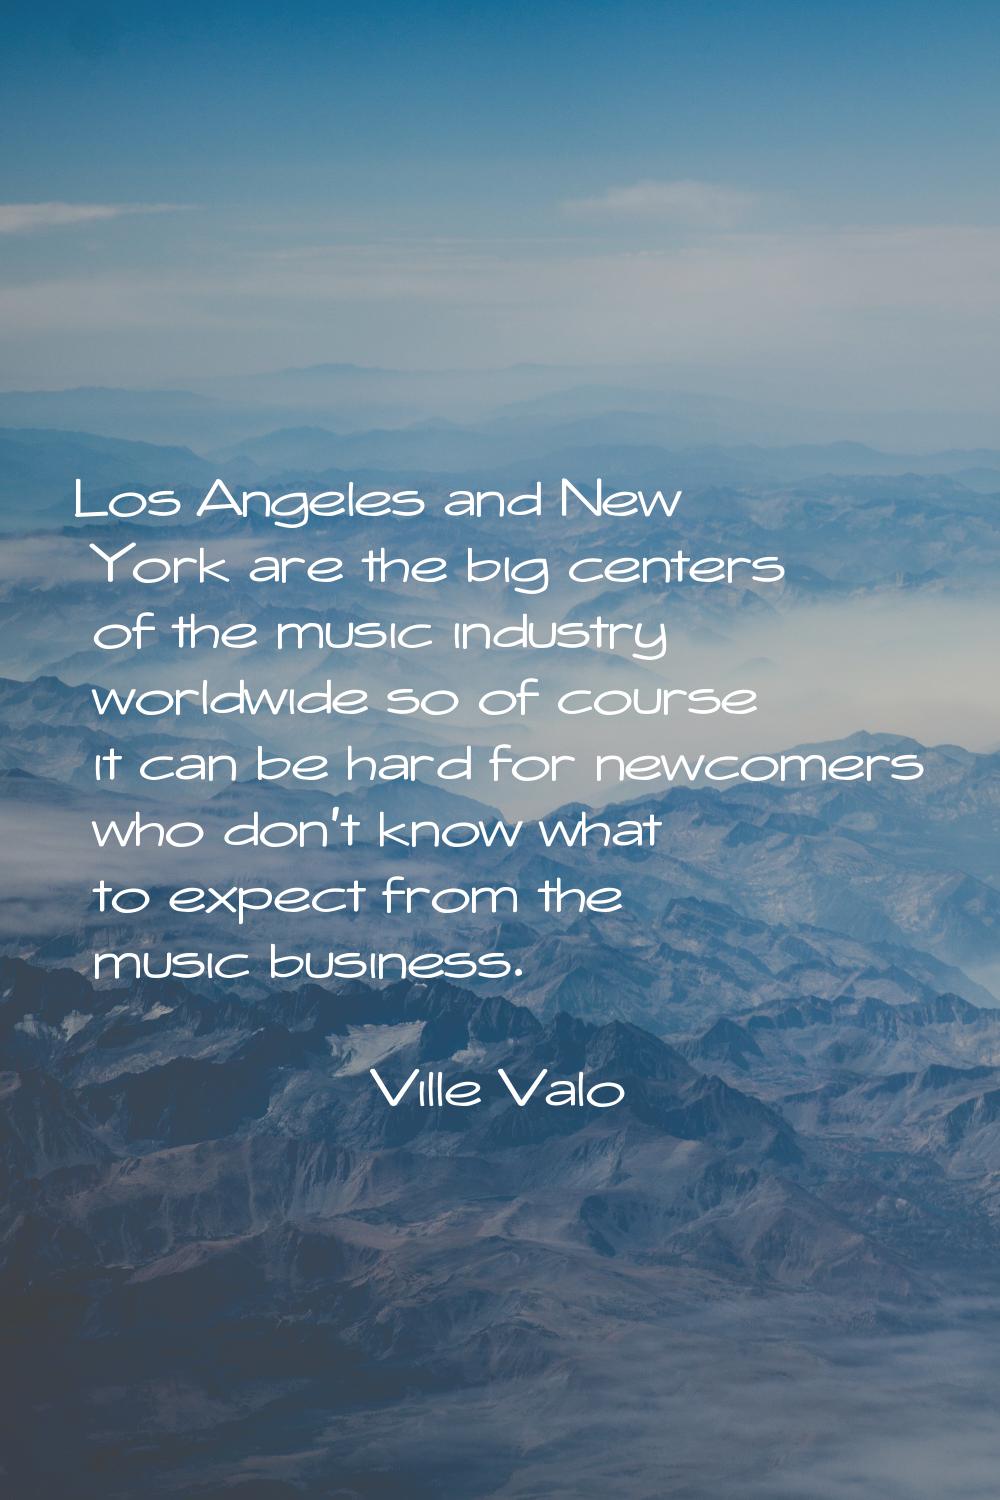 Los Angeles and New York are the big centers of the music industry worldwide so of course it can be